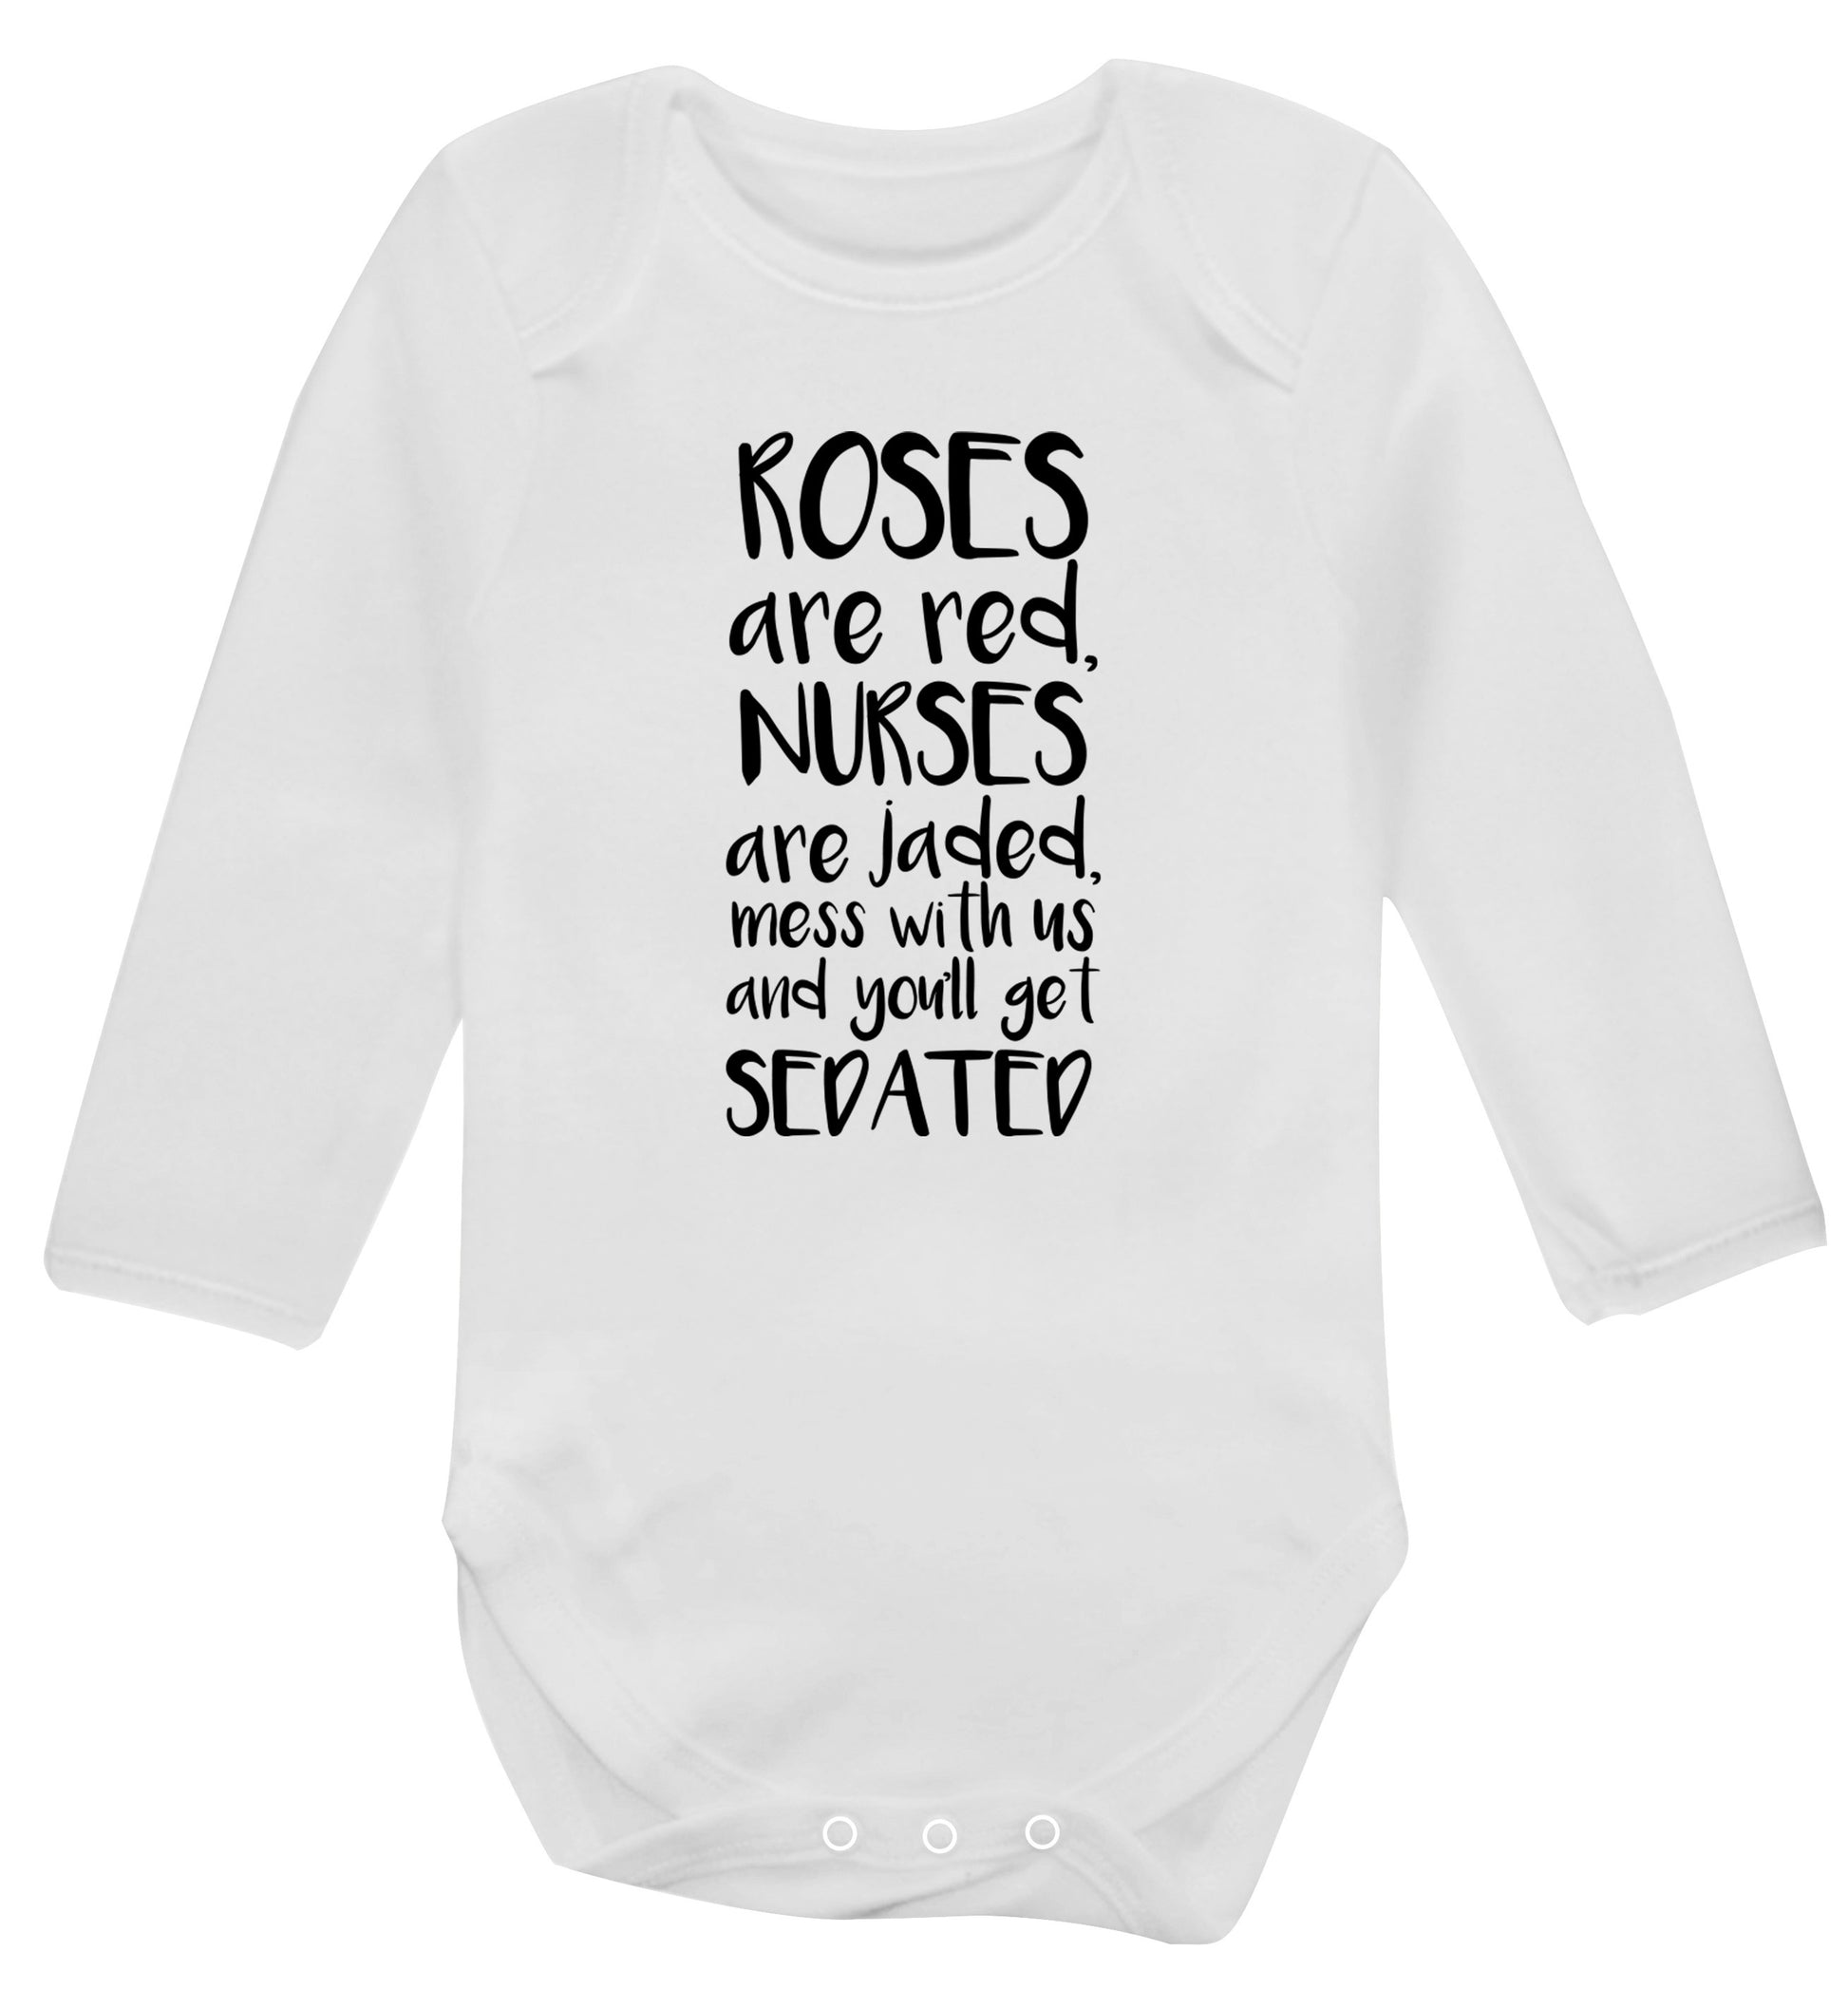 Roses are red, nurses are jaded, mess with us and you'll get sedated Baby Vest long sleeved white 6-12 months